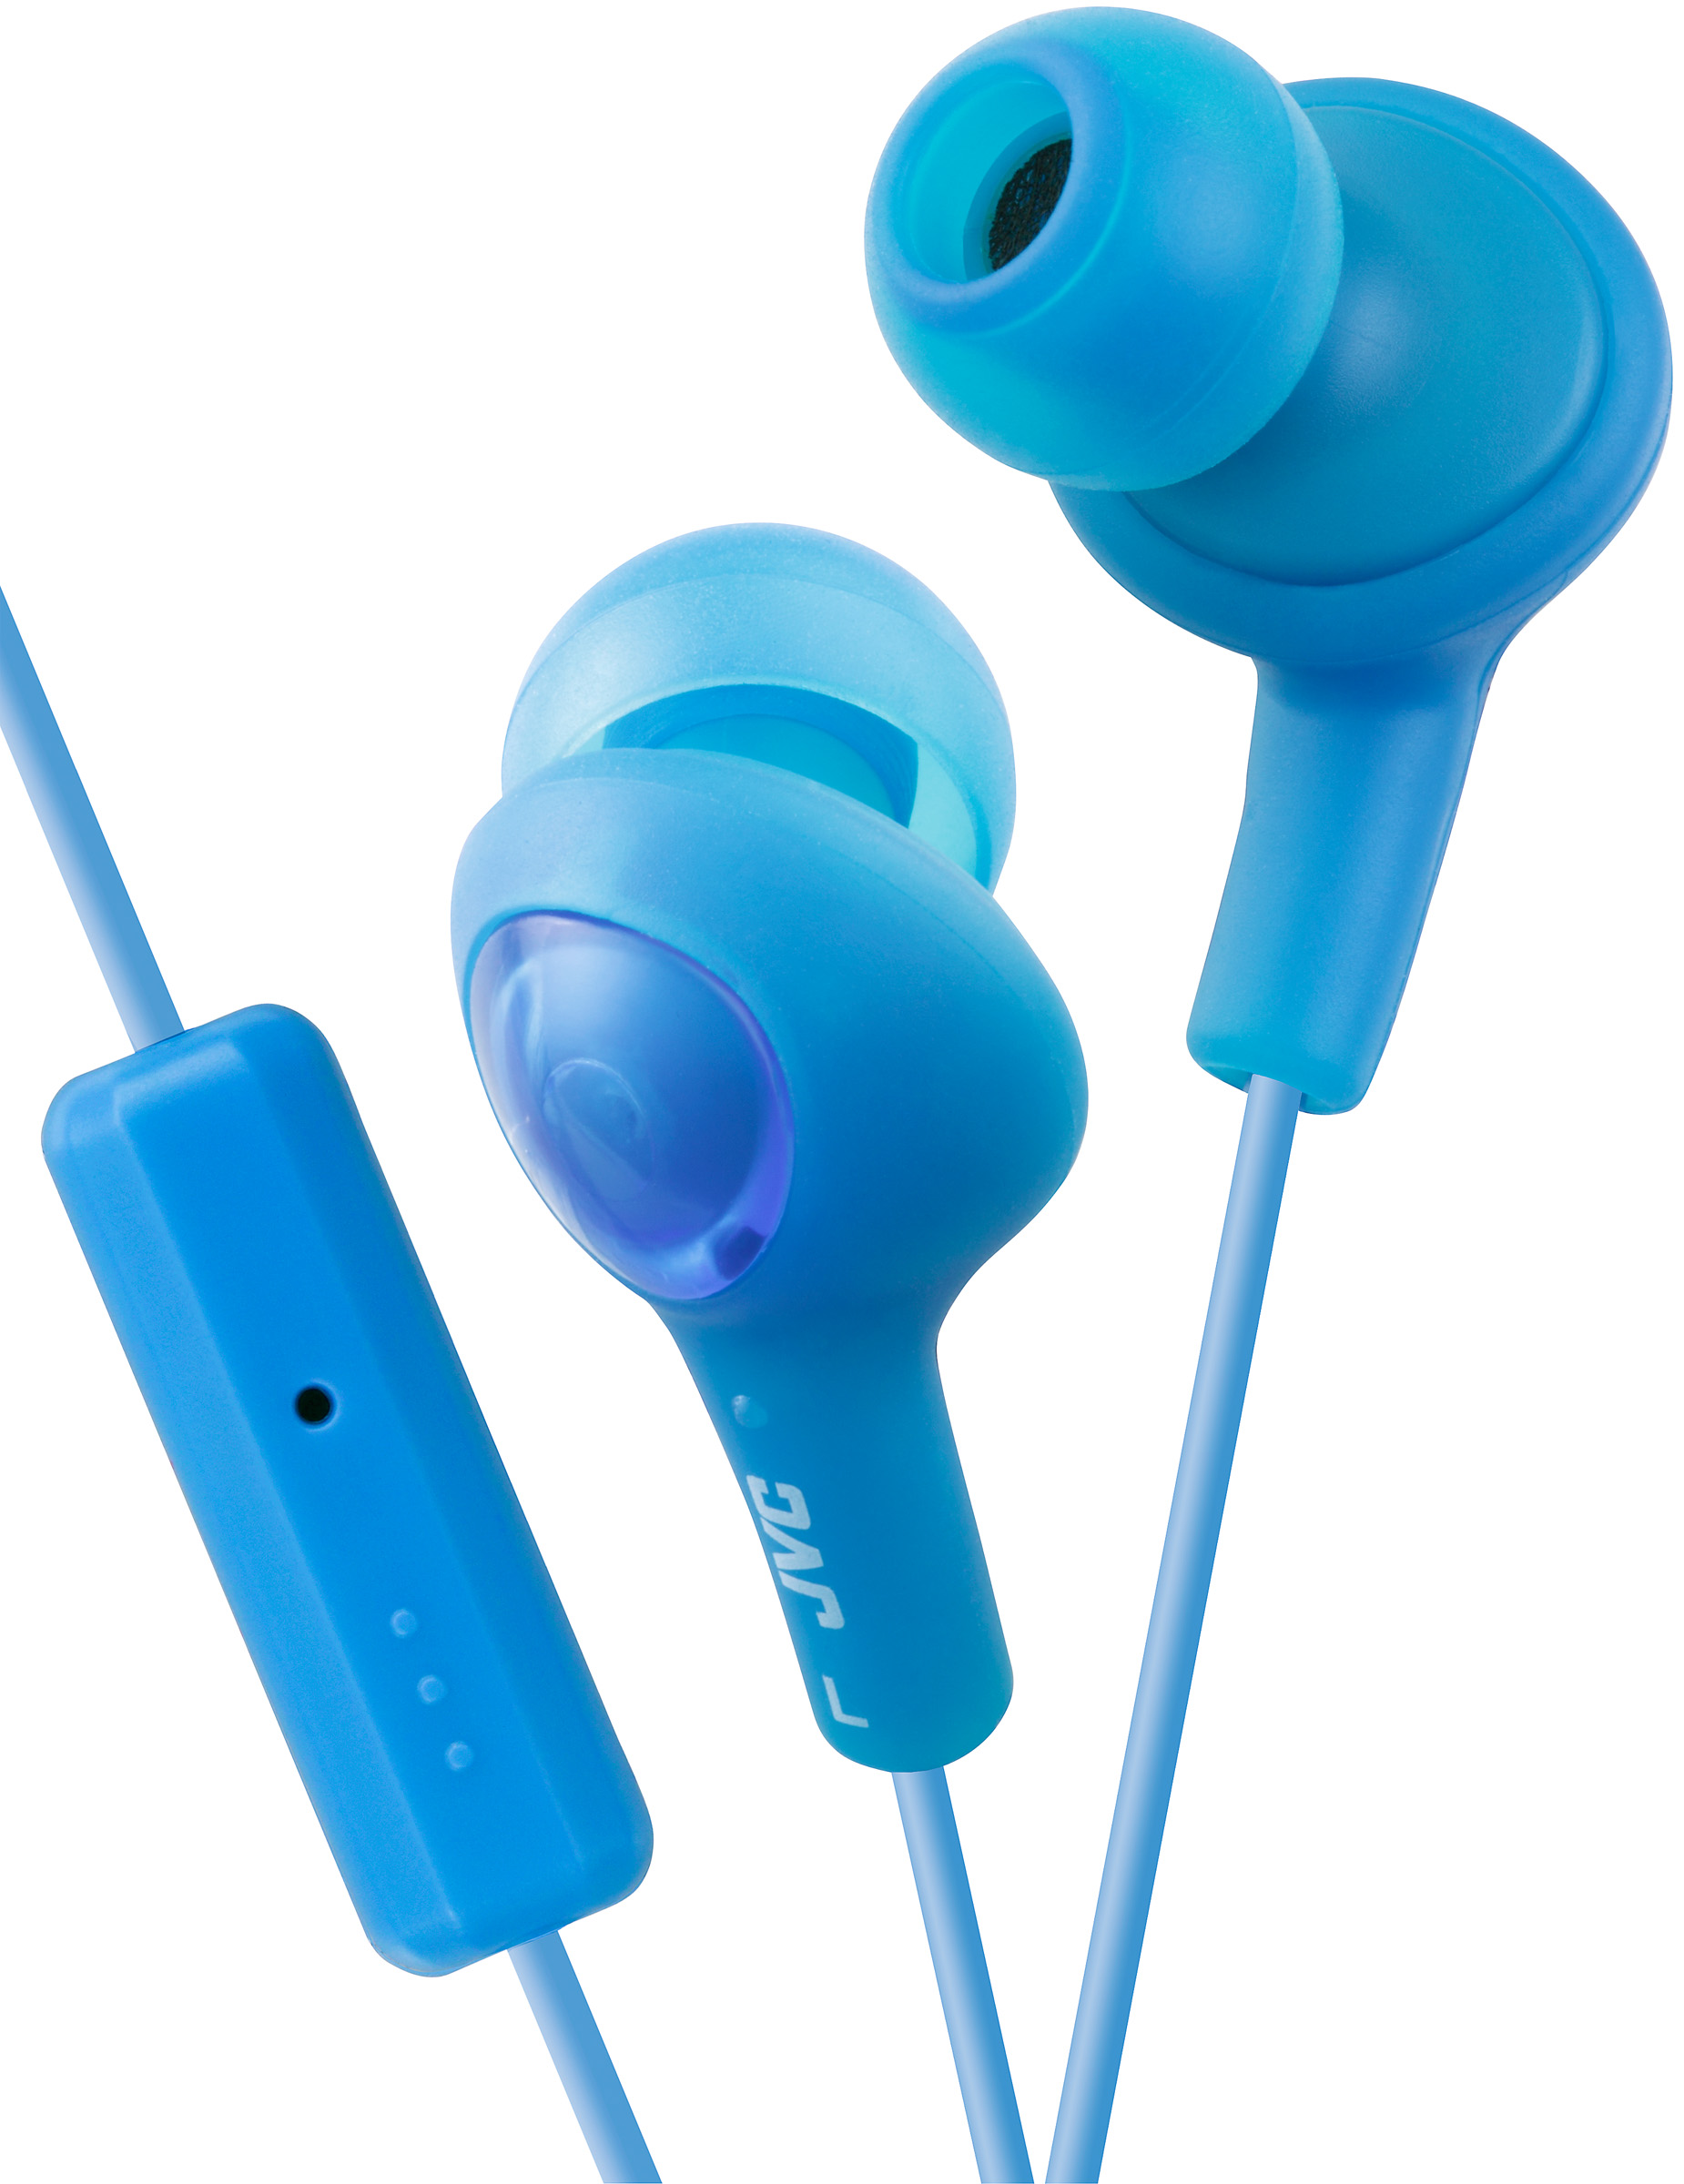 JVC HAFR6A Gumy Plus Earbuds Headphones with Mic and Remote (Blue) - image 1 of 5